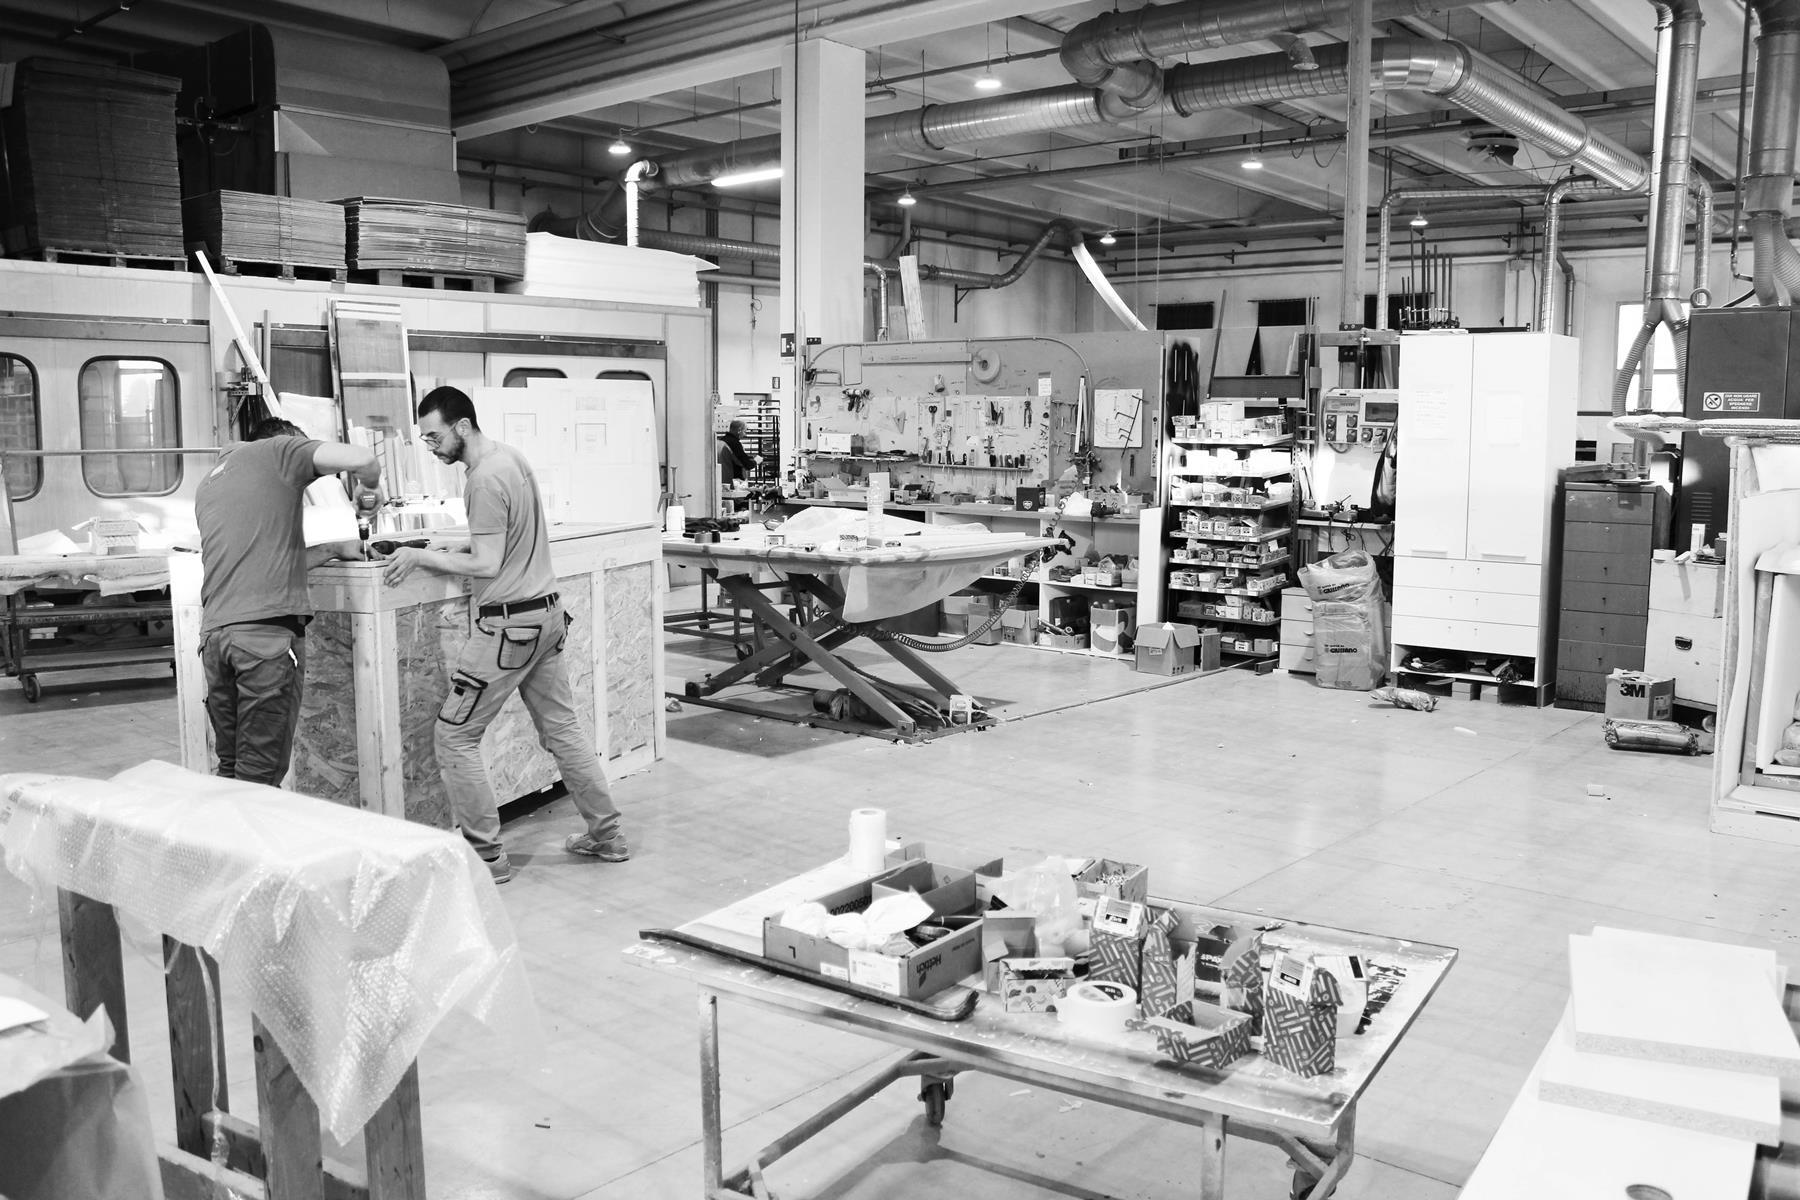 furniture production since 1850 - 11